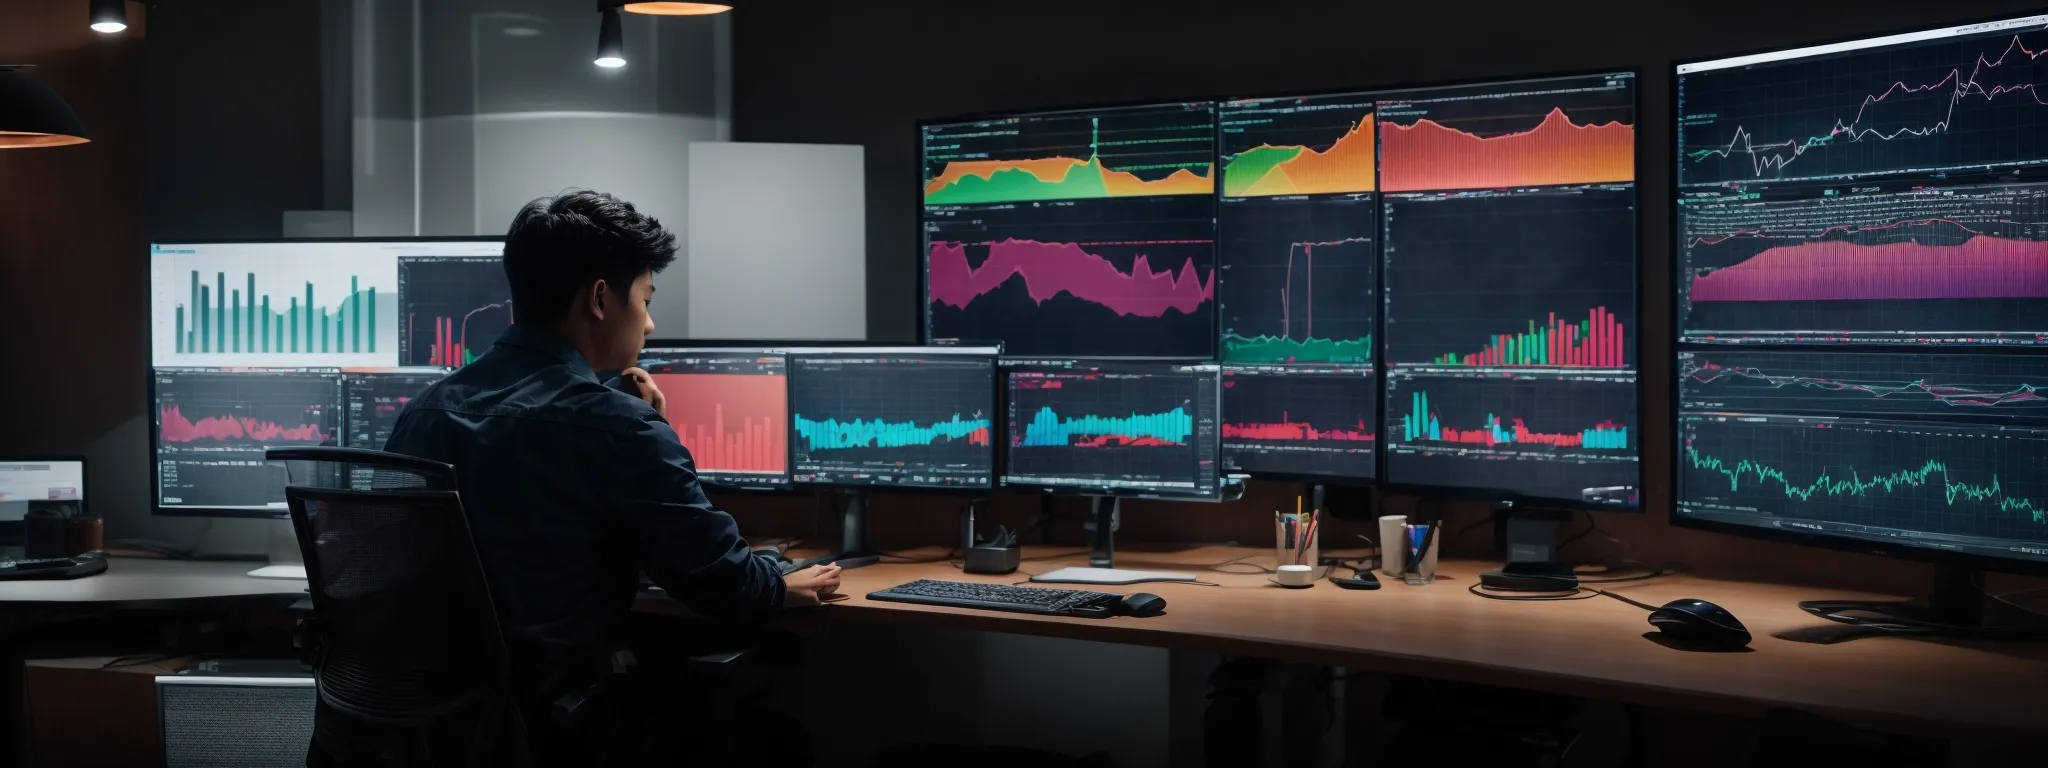 a person sits at a desk with dual monitors displaying colorful graphs and charts of seo data analysis.